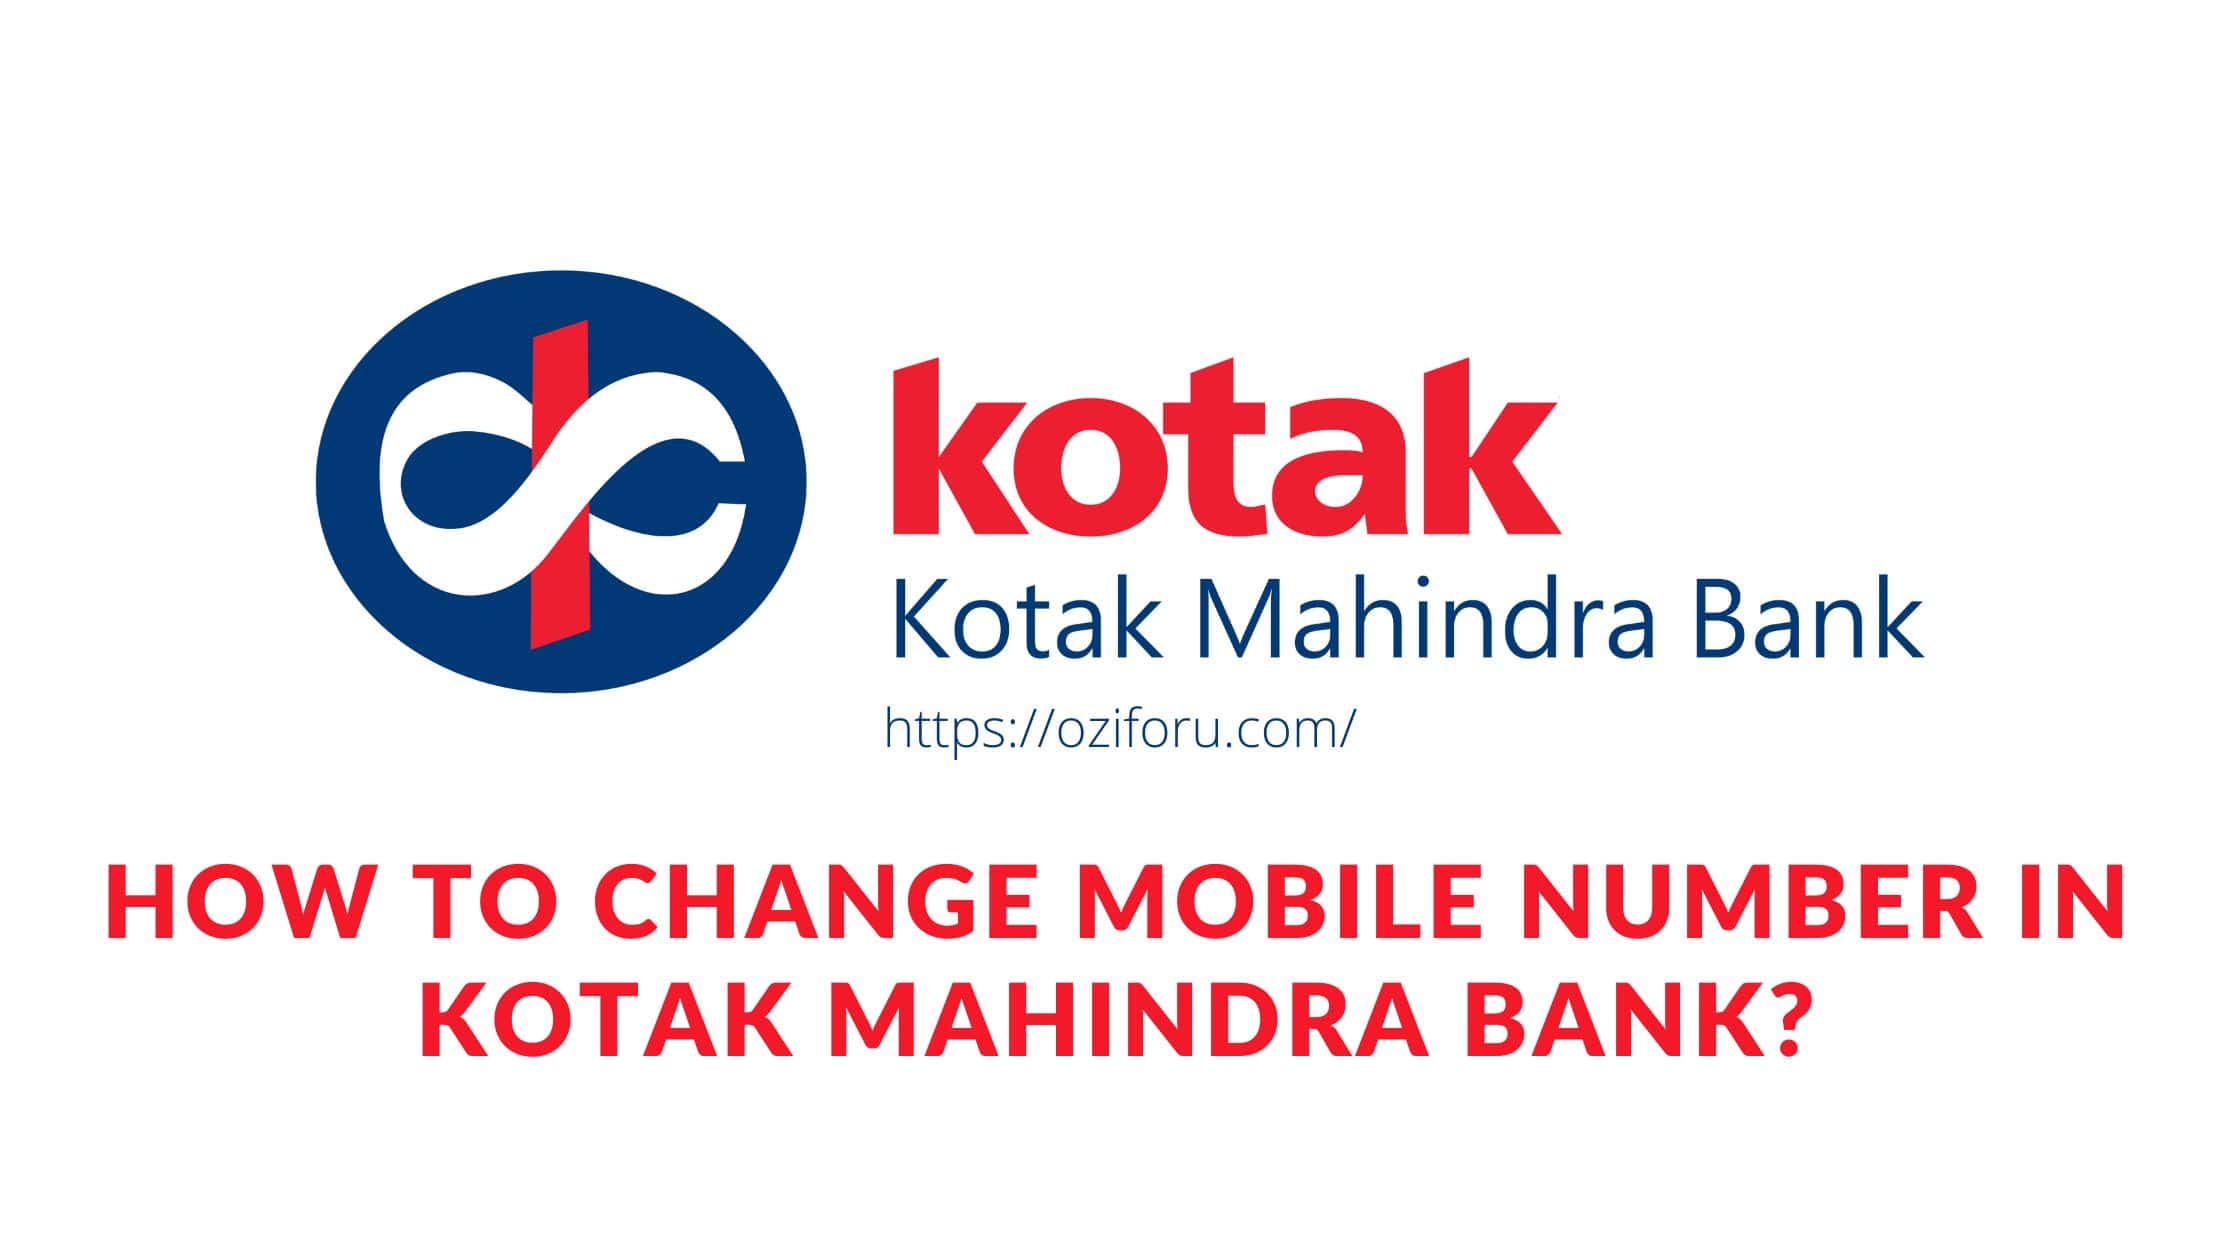 How To Change Mobile Number In Kotak Mahindra Bank